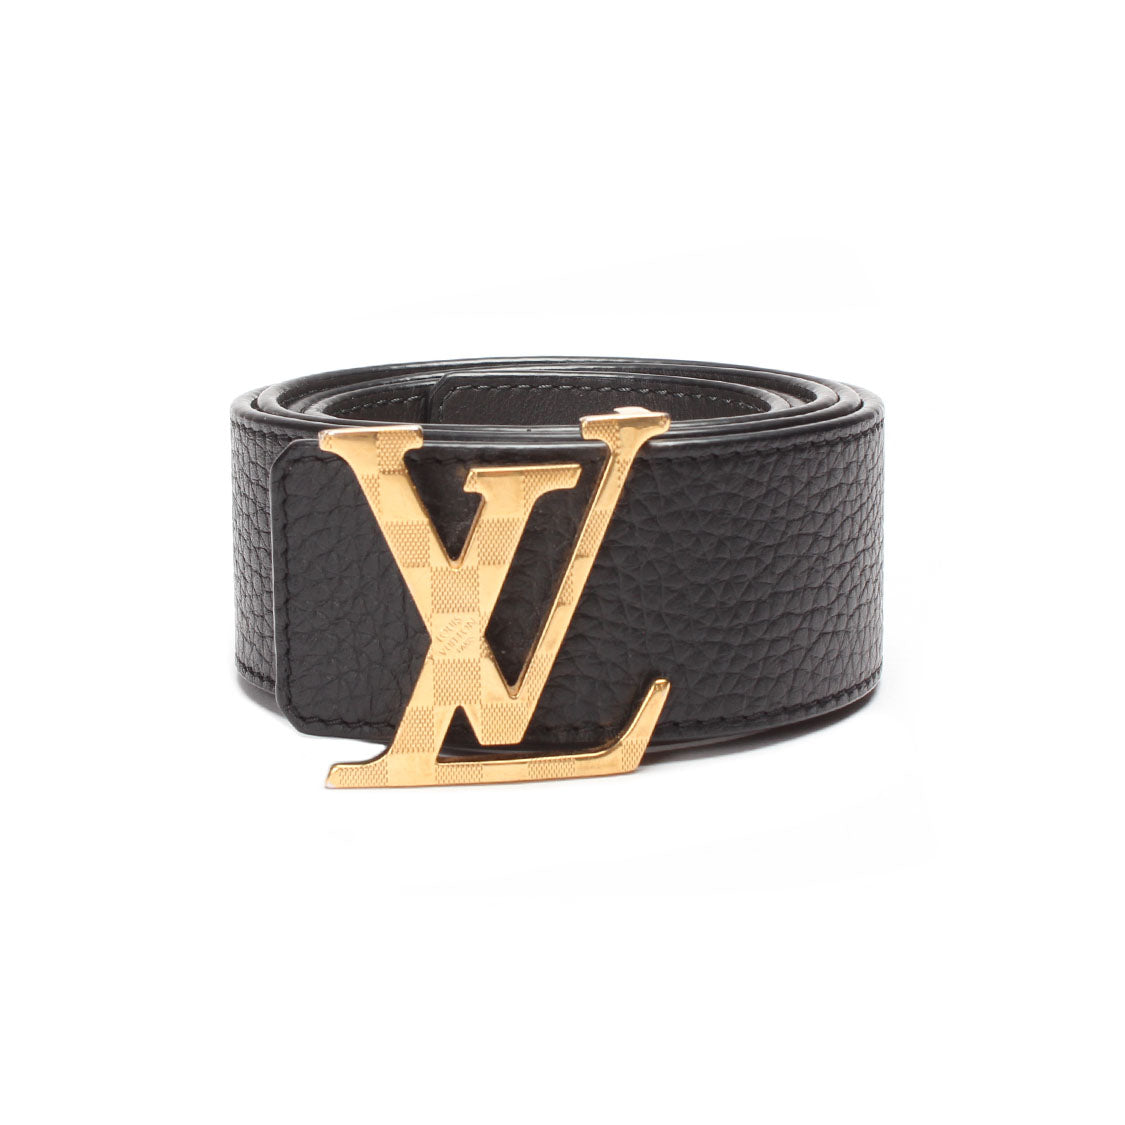 LV Initiales Leather Belt M0333